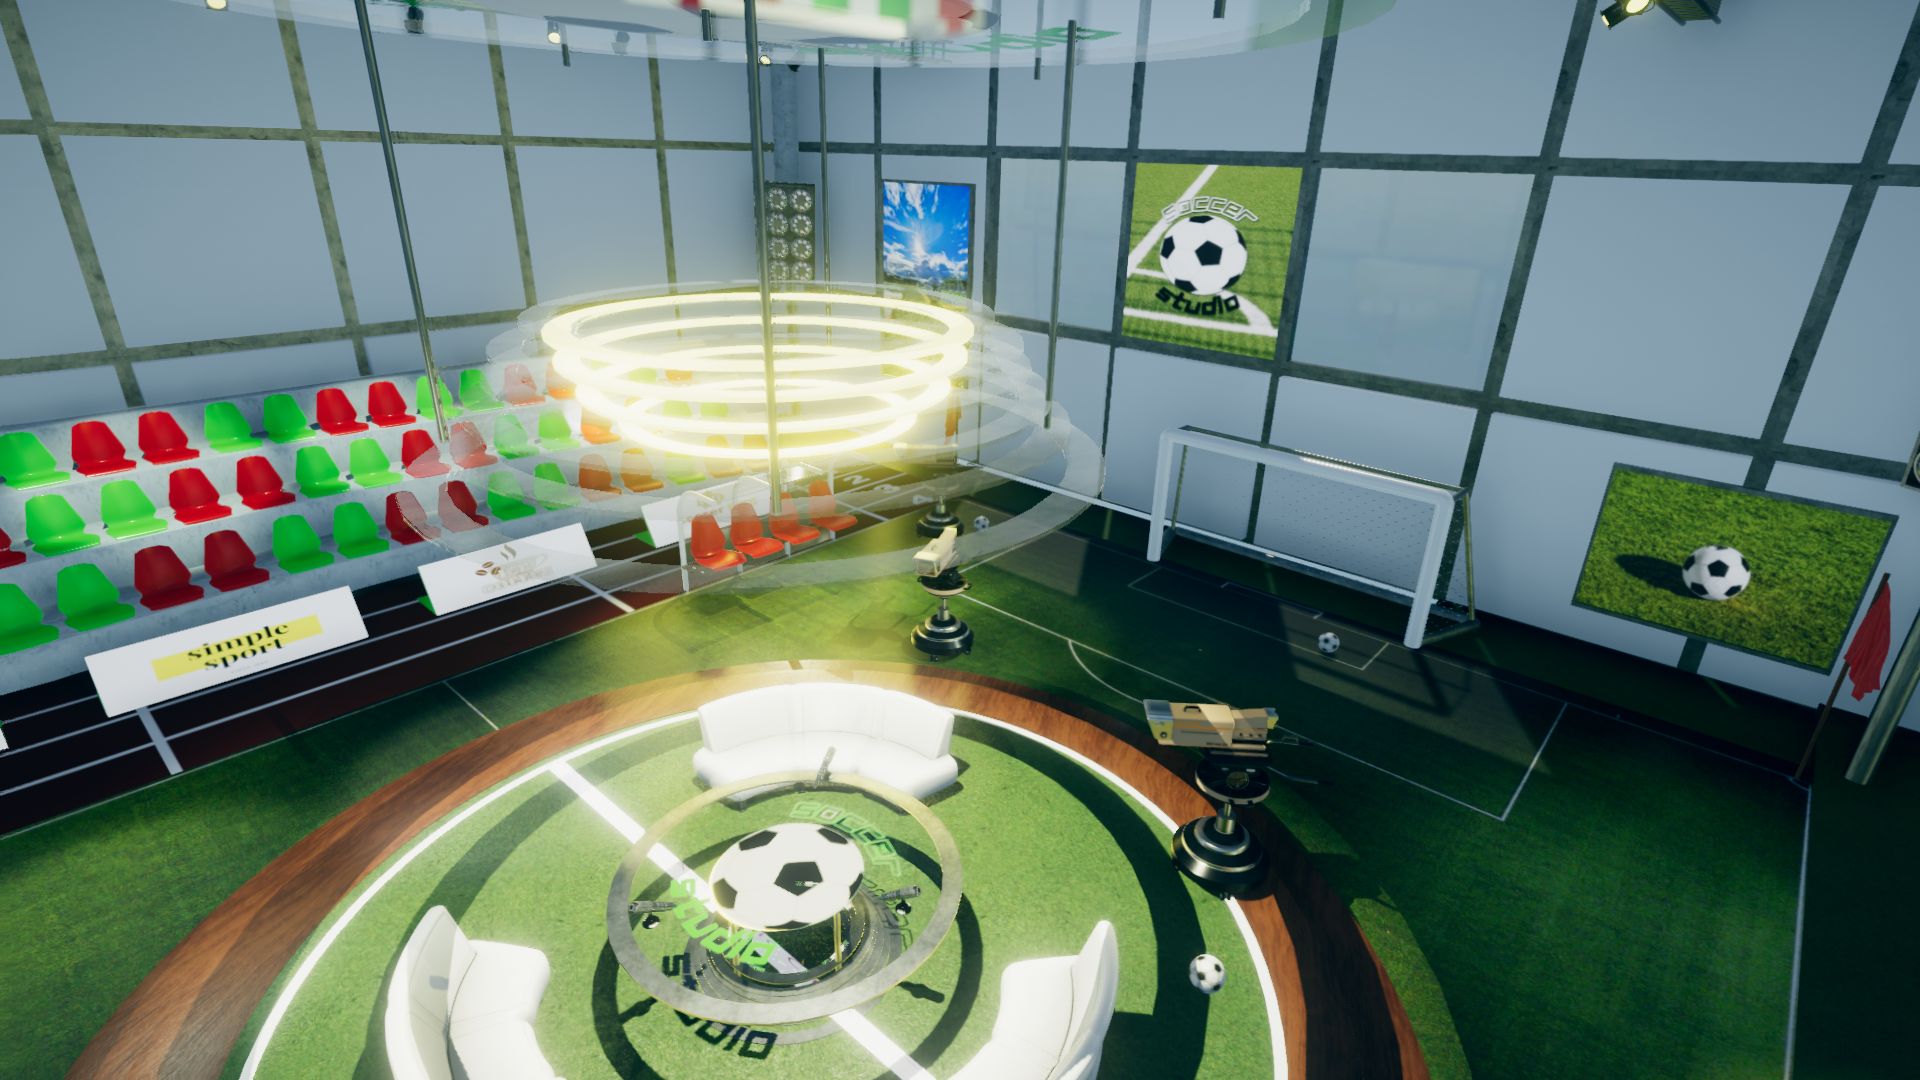 An image showing Soccer Studio Set asset pack, created with Unity Engine.